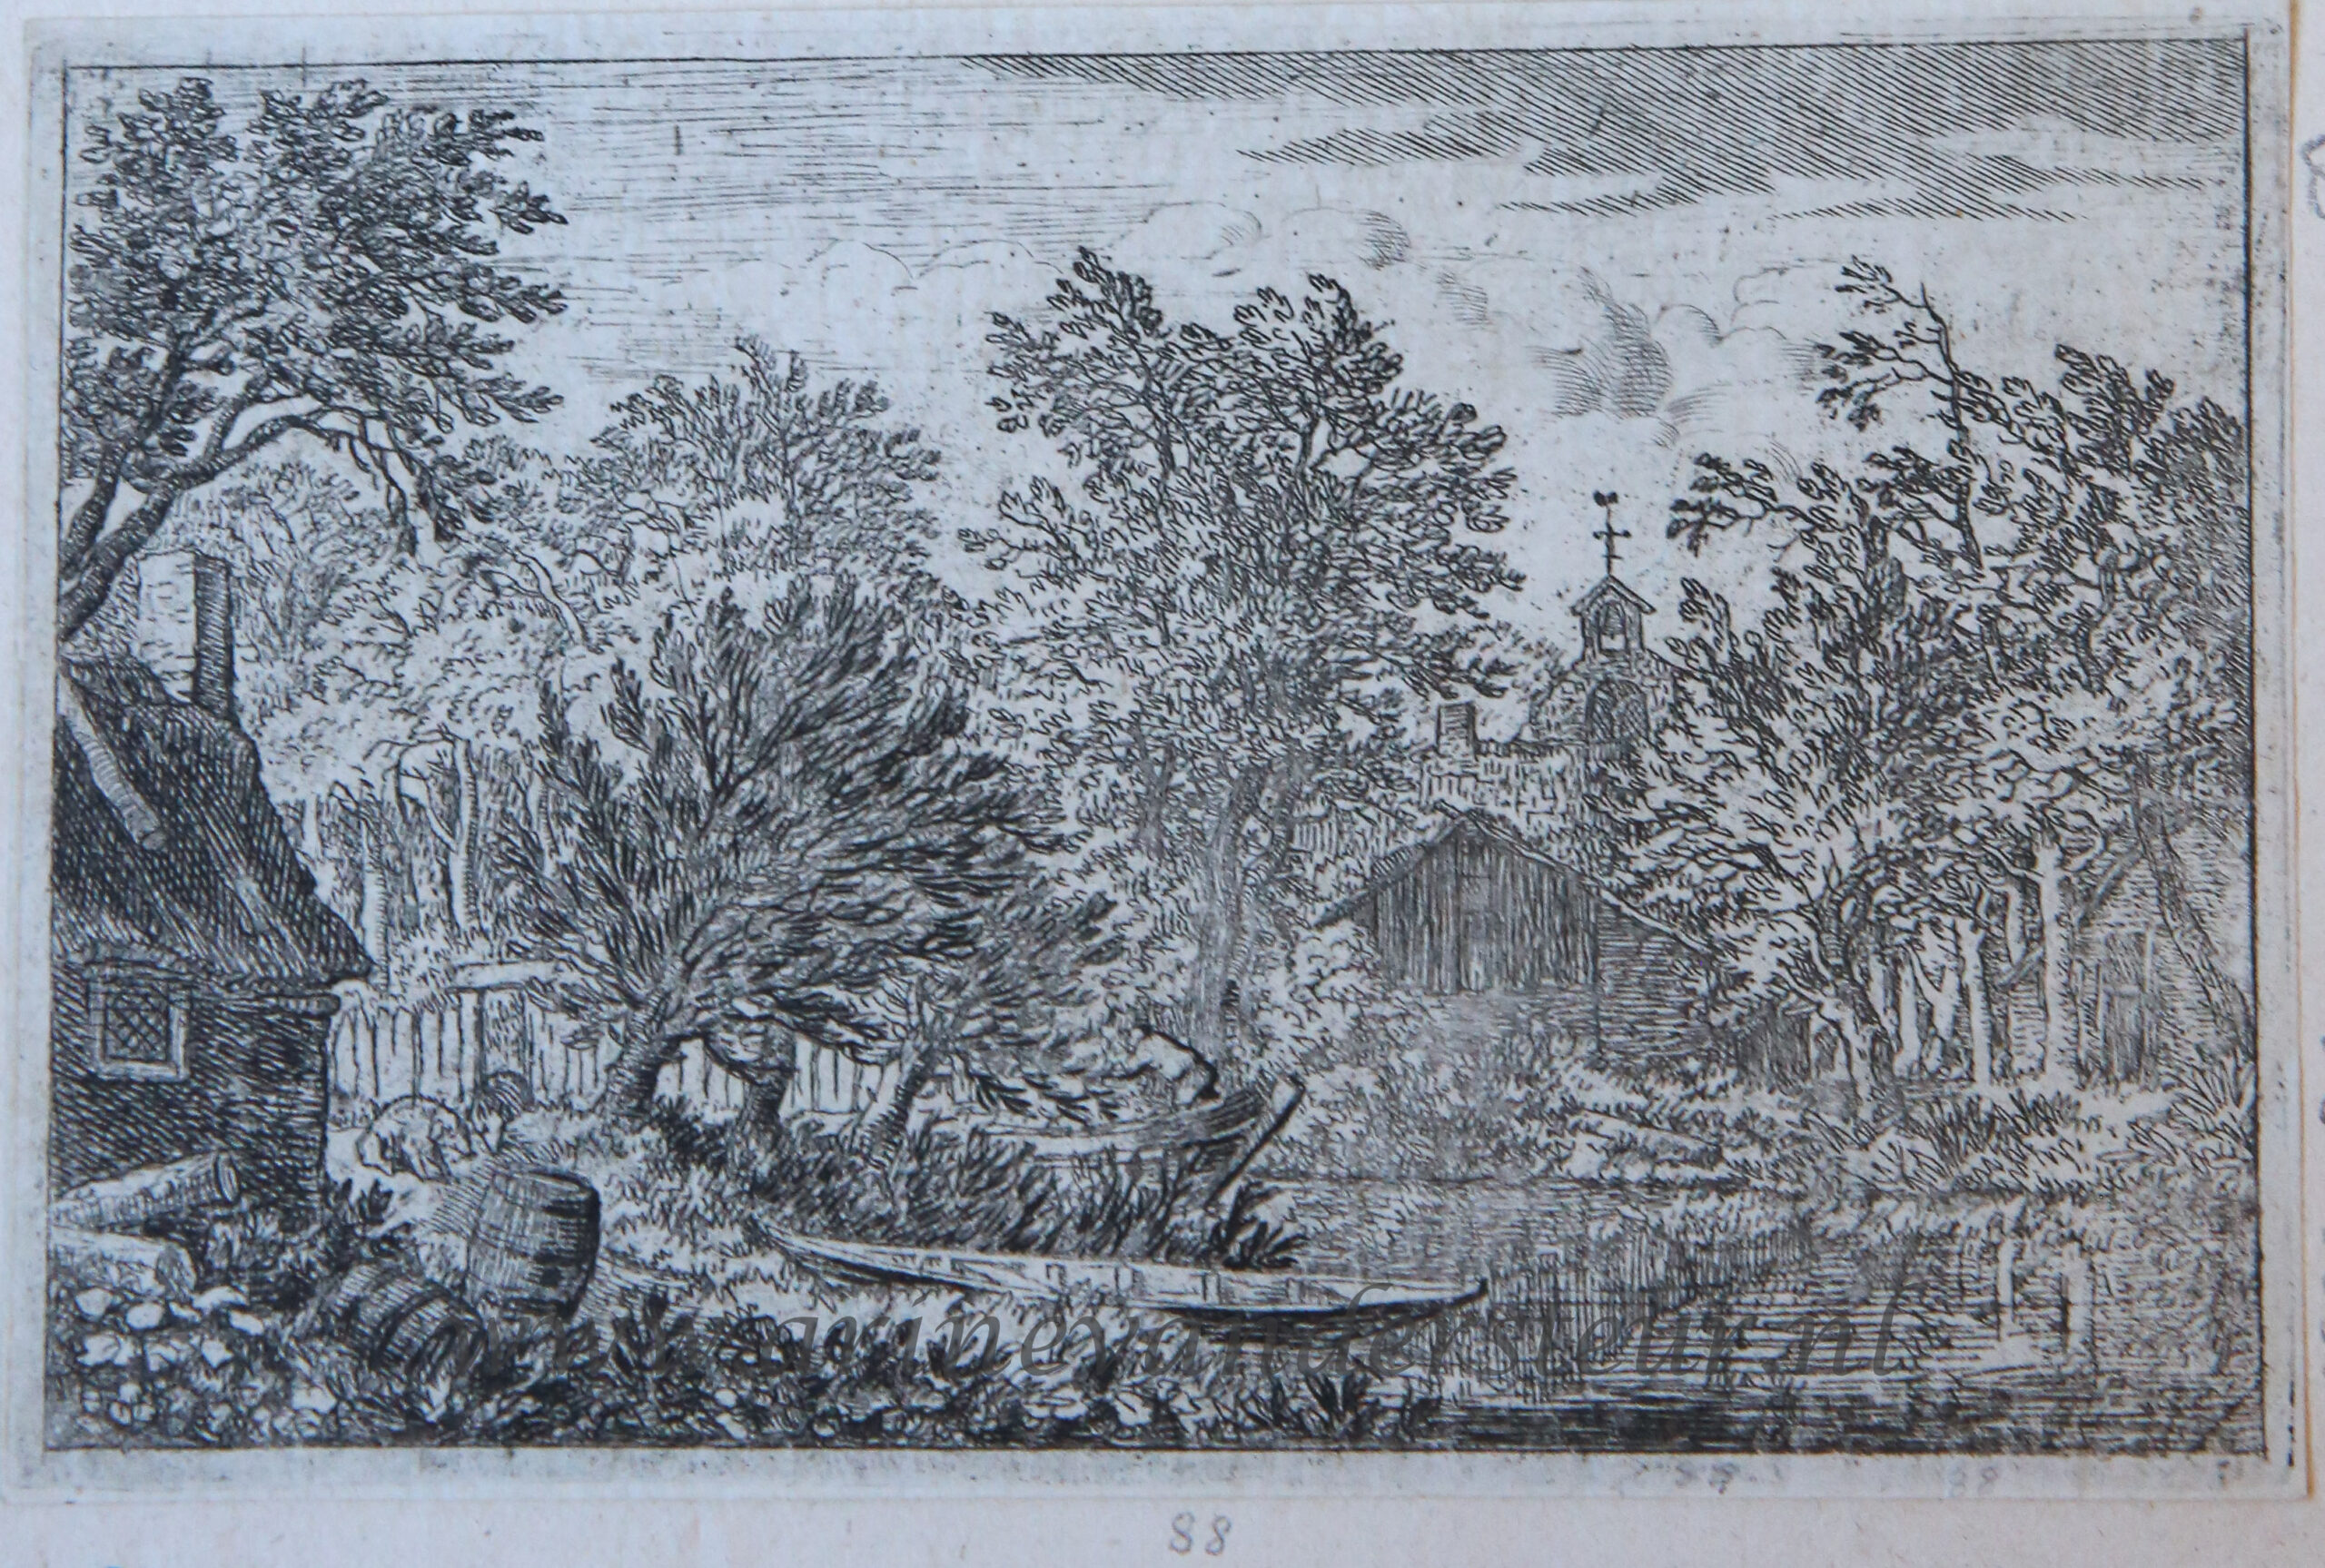 [Antique landscape print, etching/ets] The boat at the river bank/Boot aan de rivieroever, published 1631-1675.